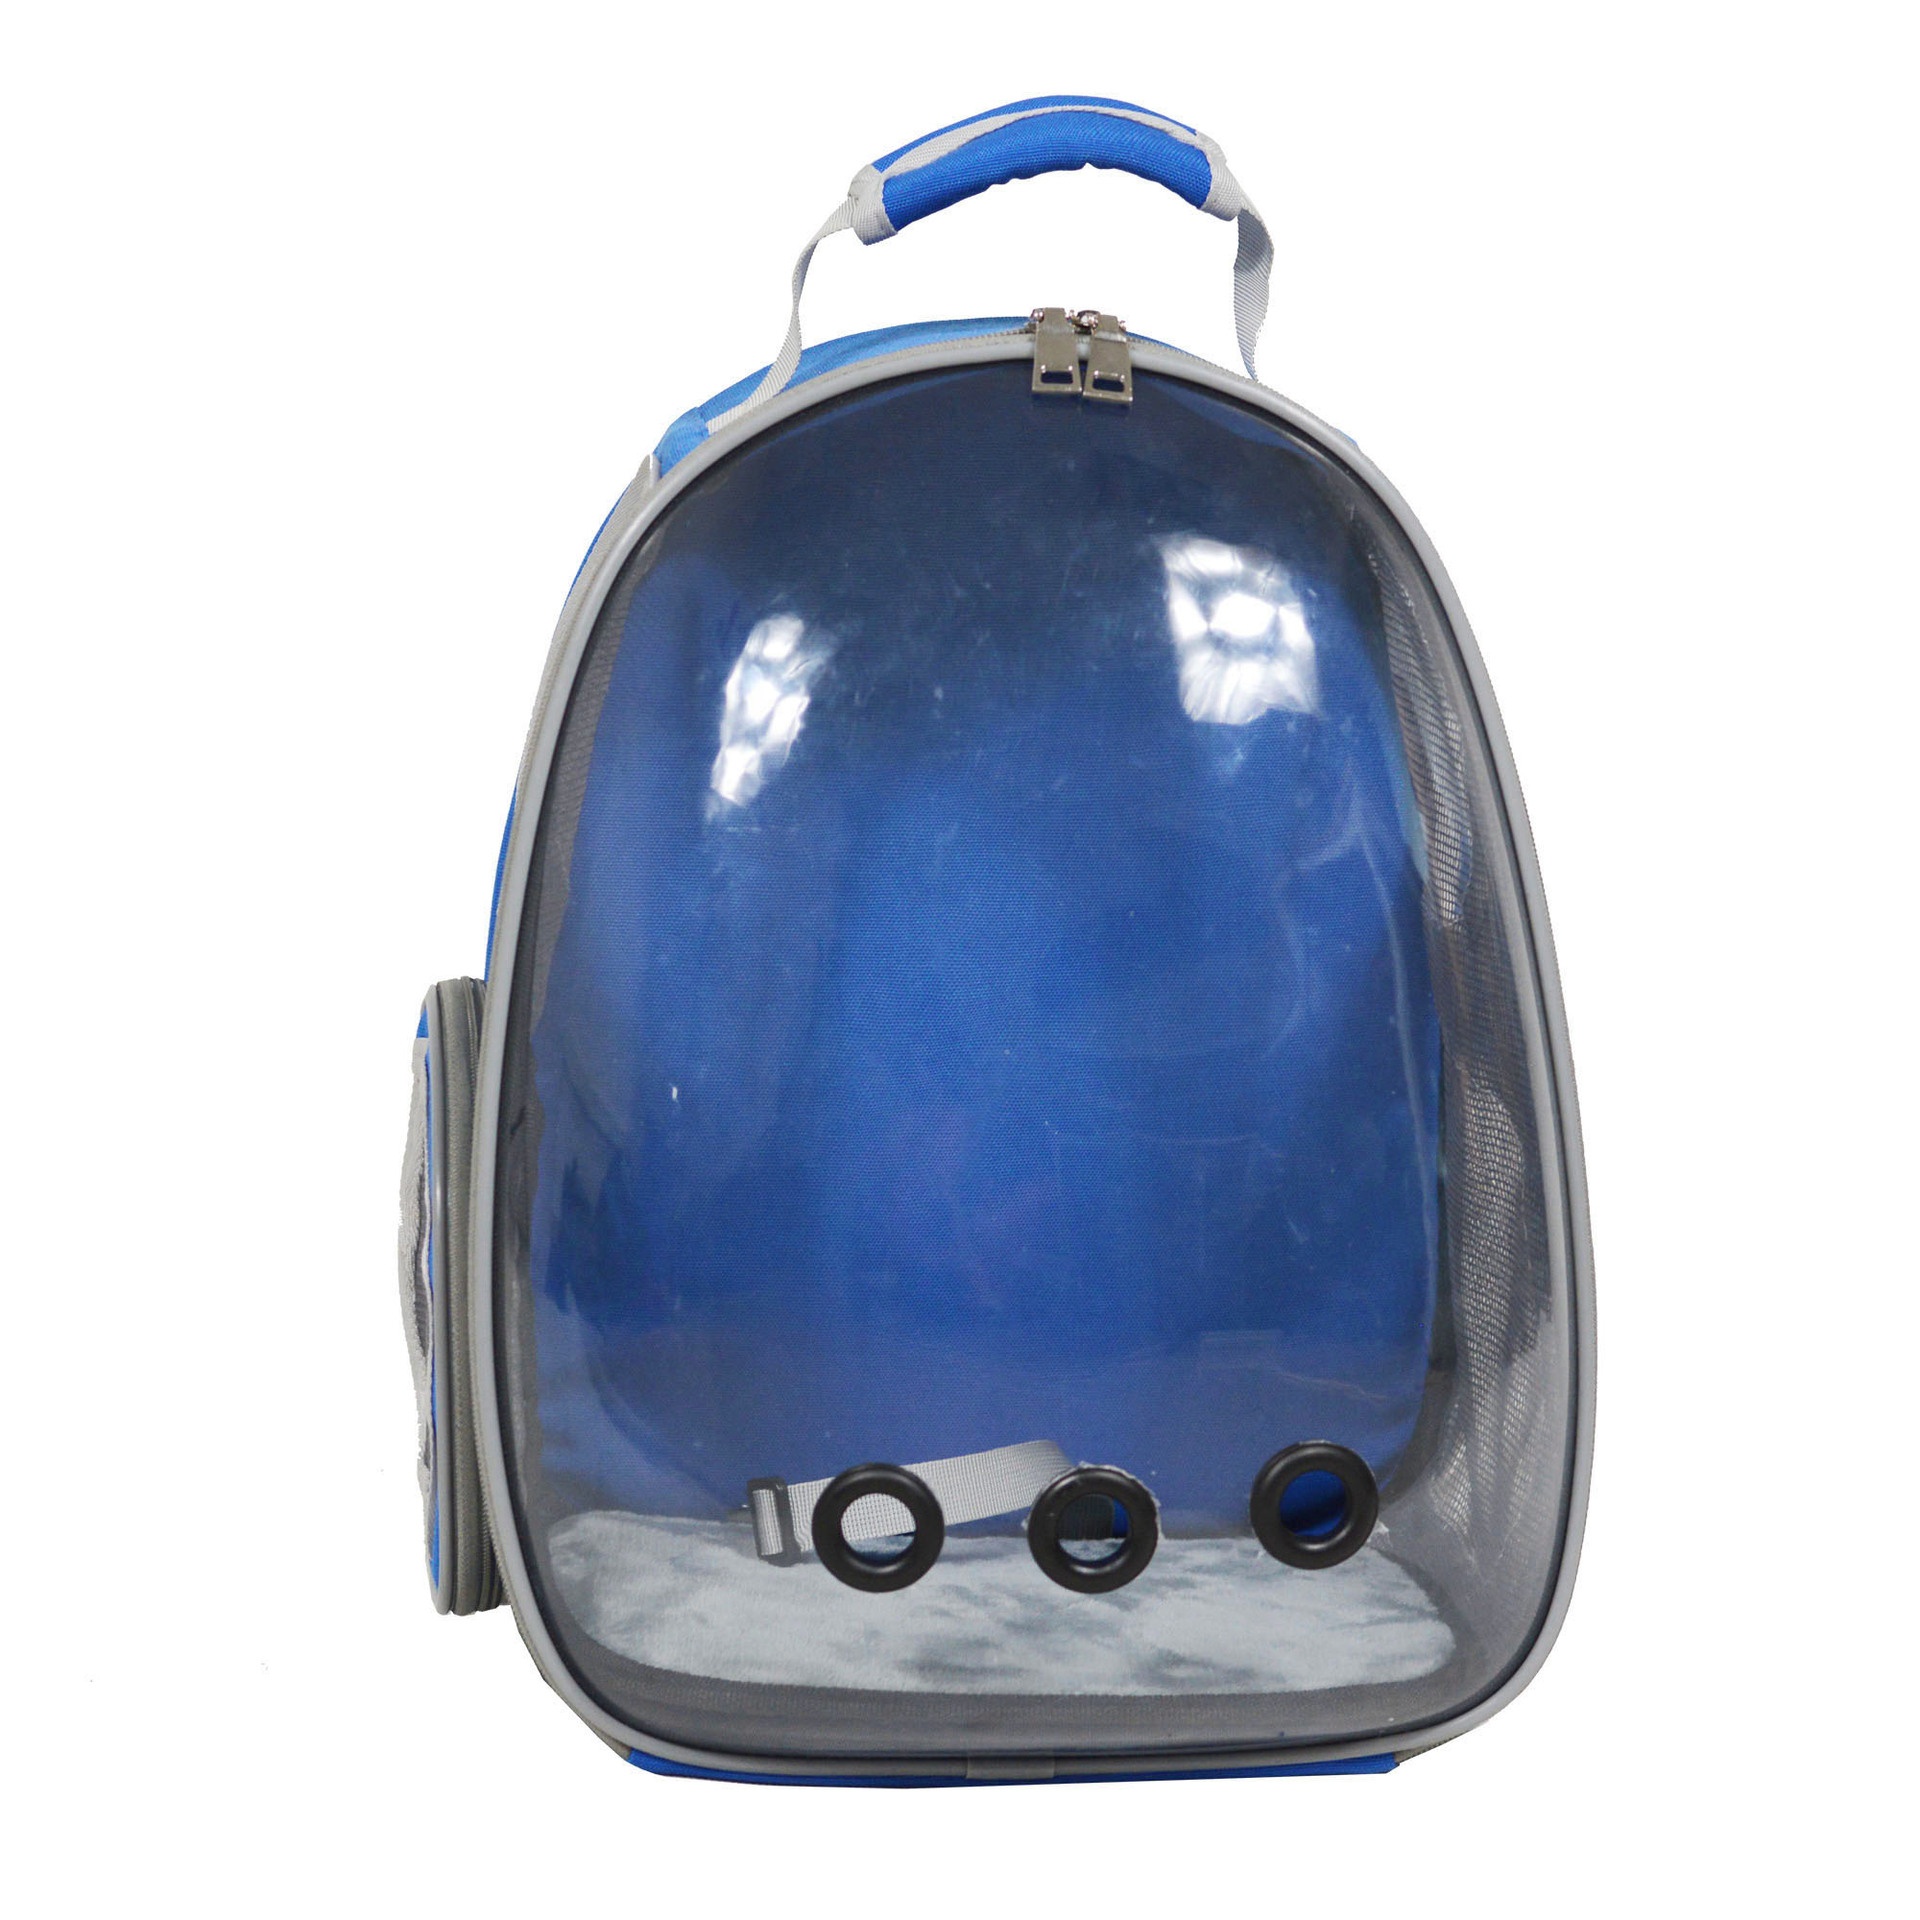 Customized Transparent Ventilate Capsule Pet Carrier Shoulder Bag backpack Collapsible for Travel Hiking Outdoor